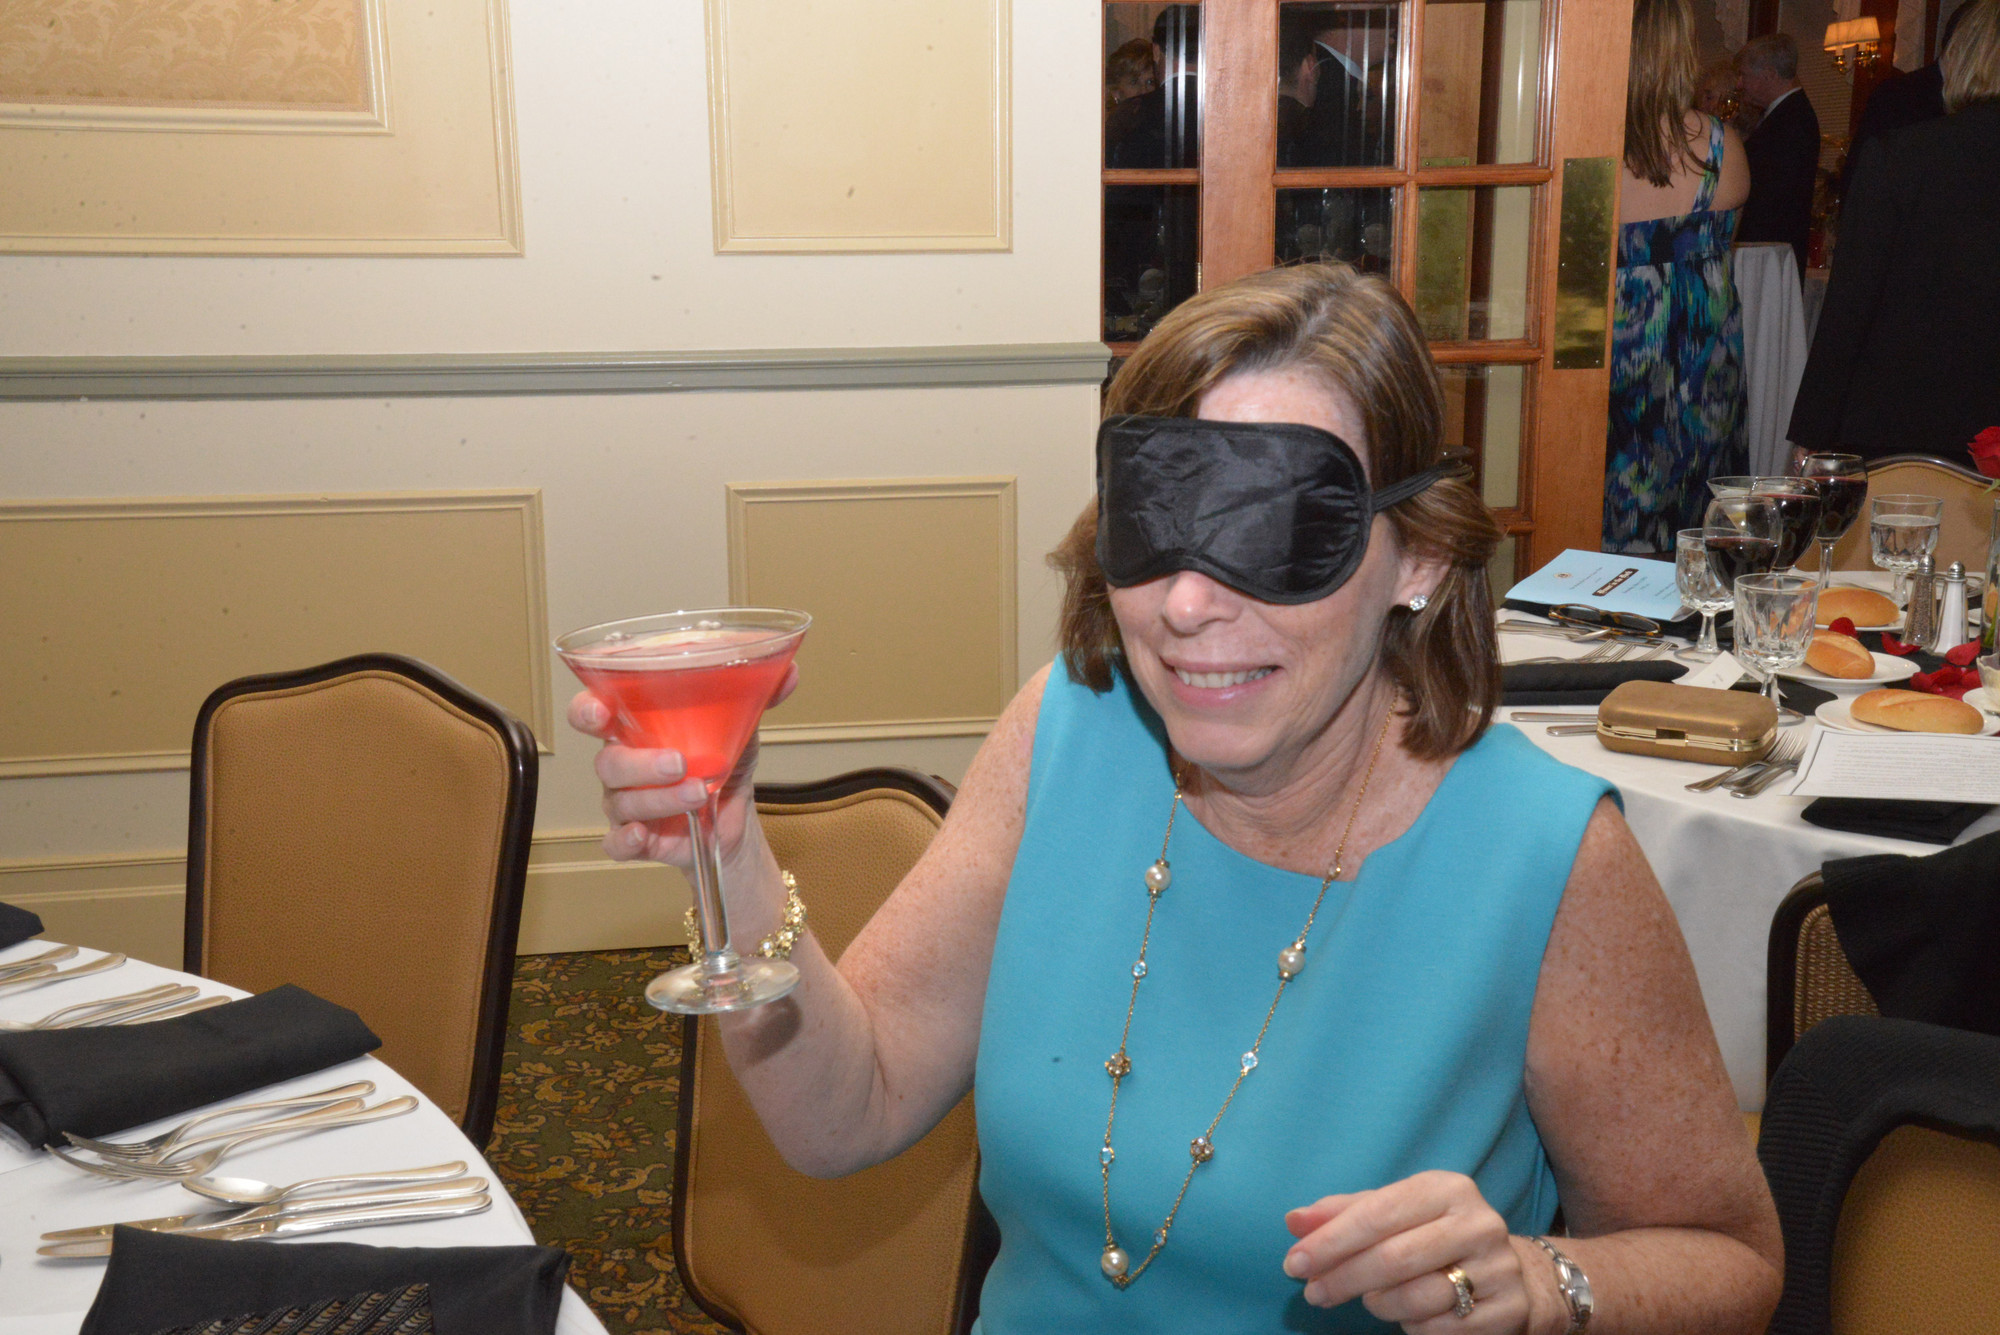 Eileen Alexanderson dined in the dark to learn about visual impairment.